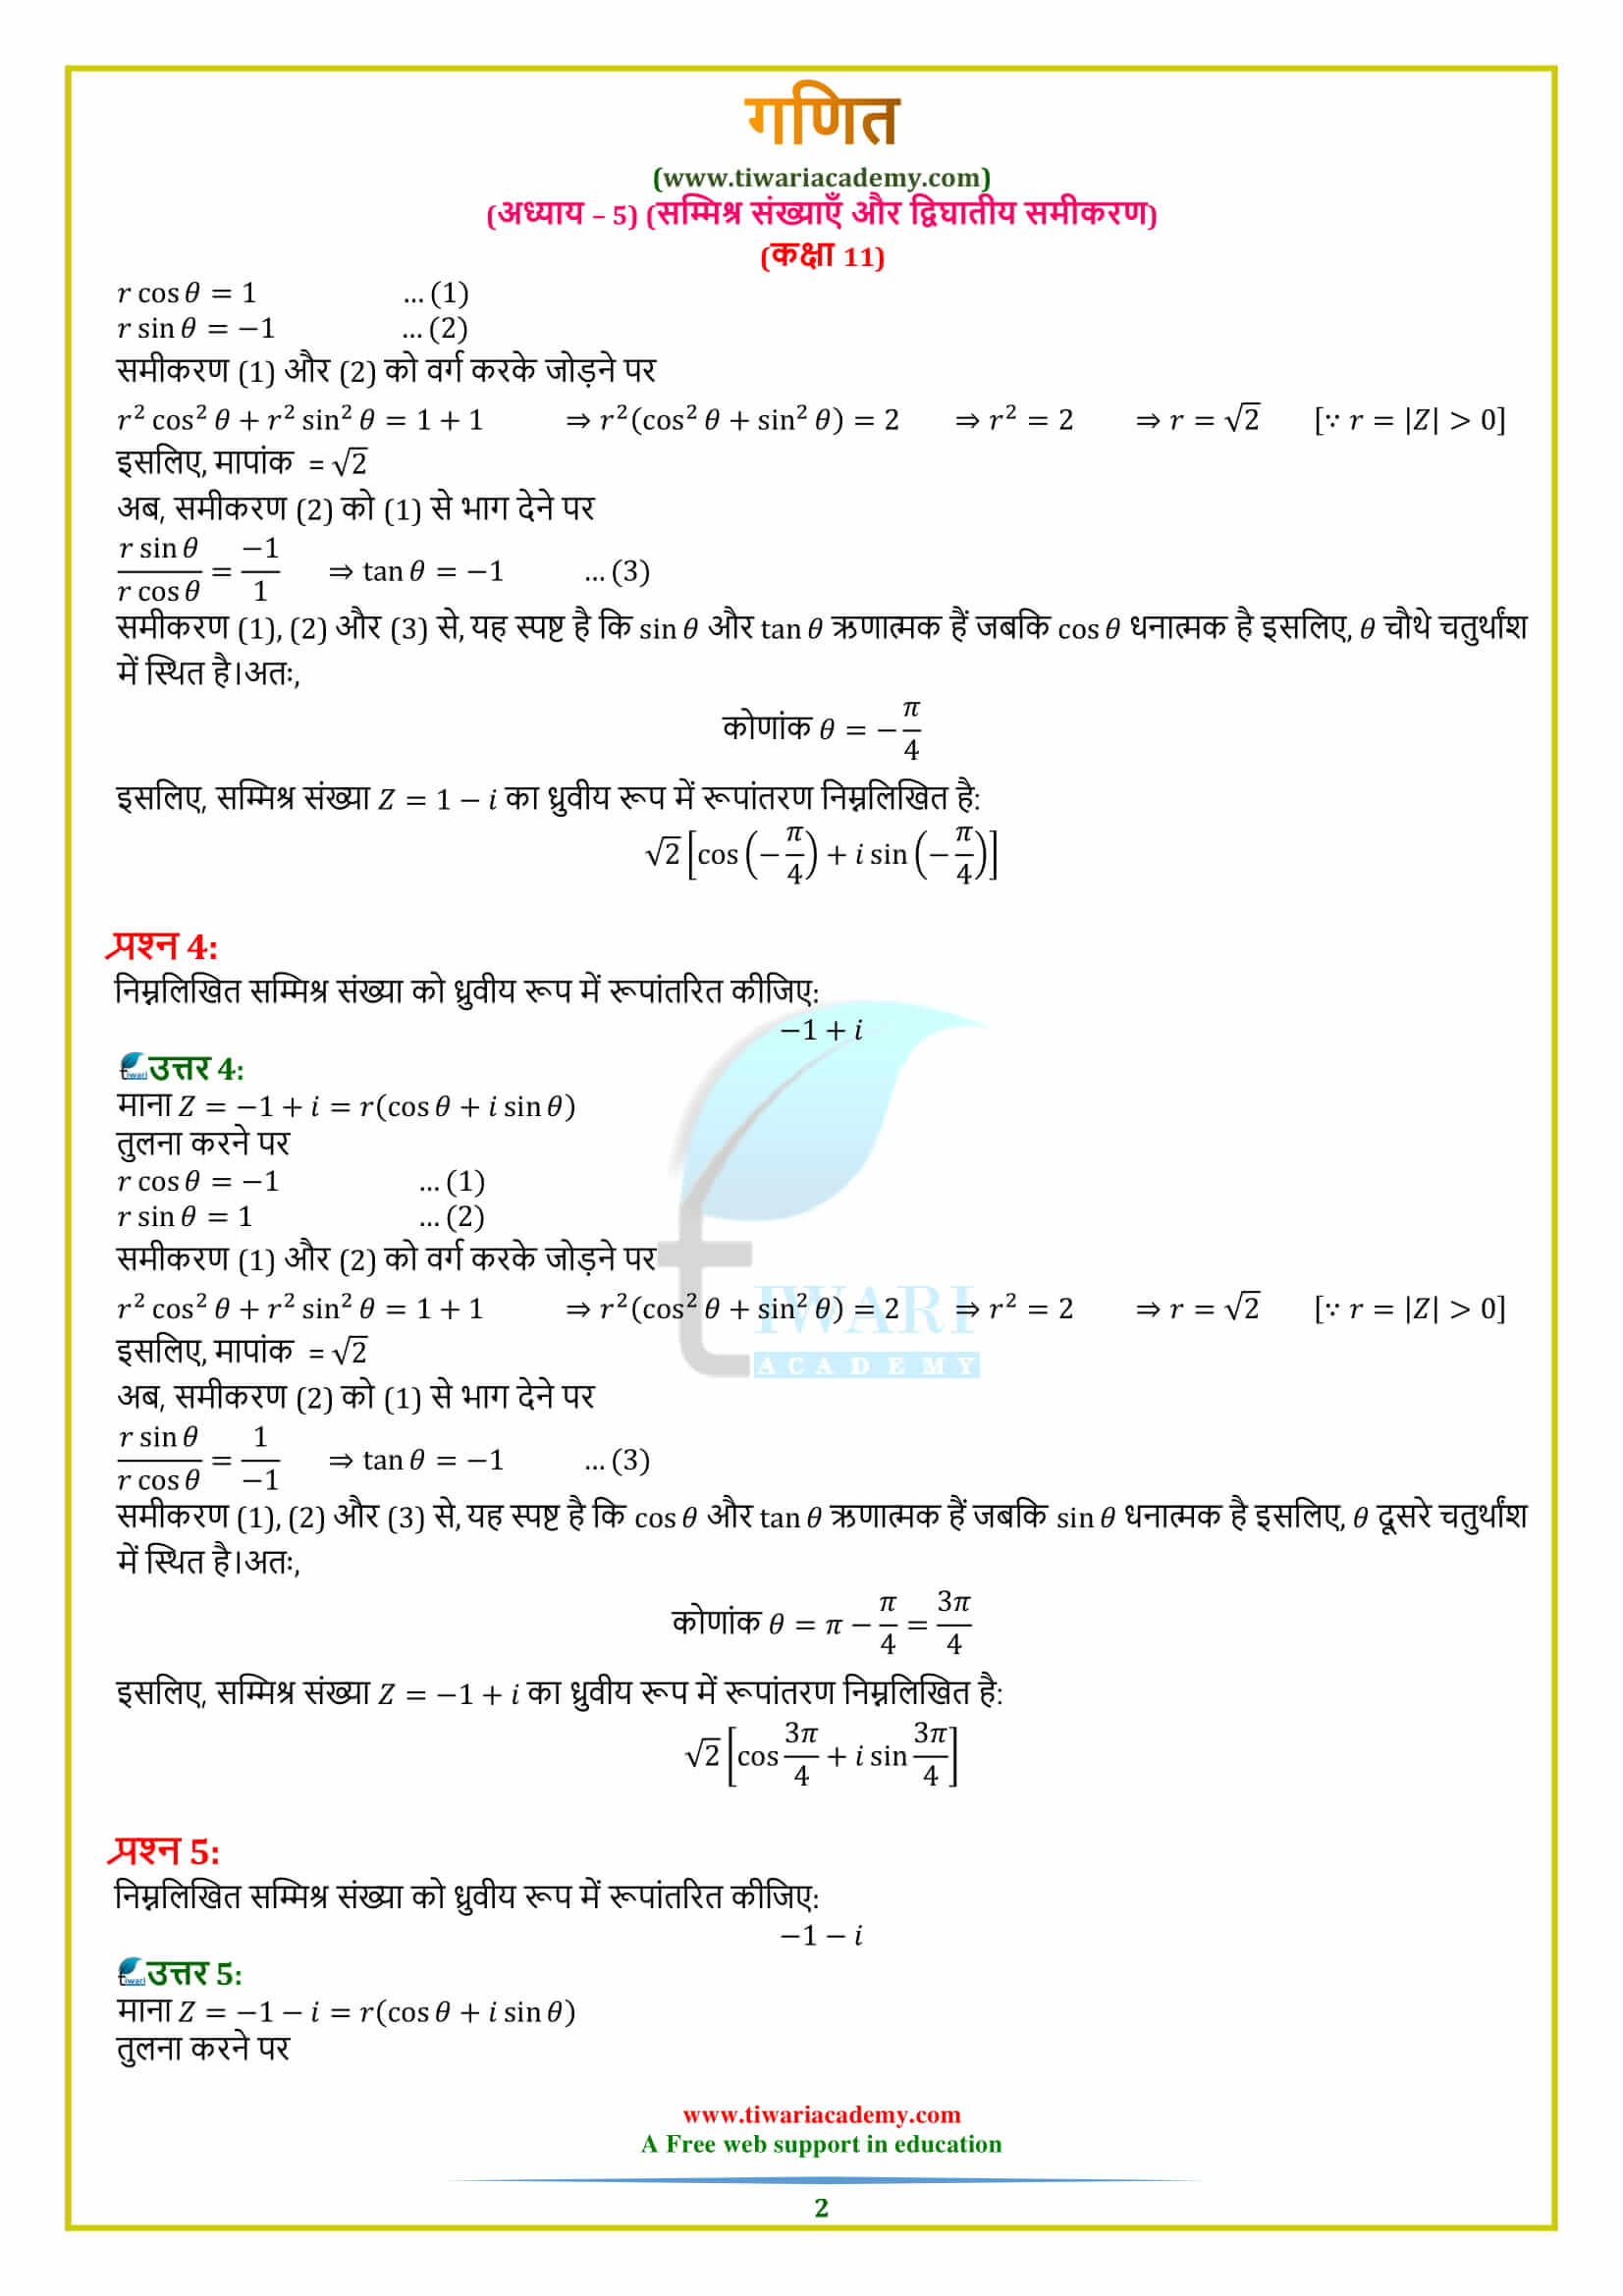 11 Maths Chapter 5 Exercise 5.2 solutions in Hindi for up board